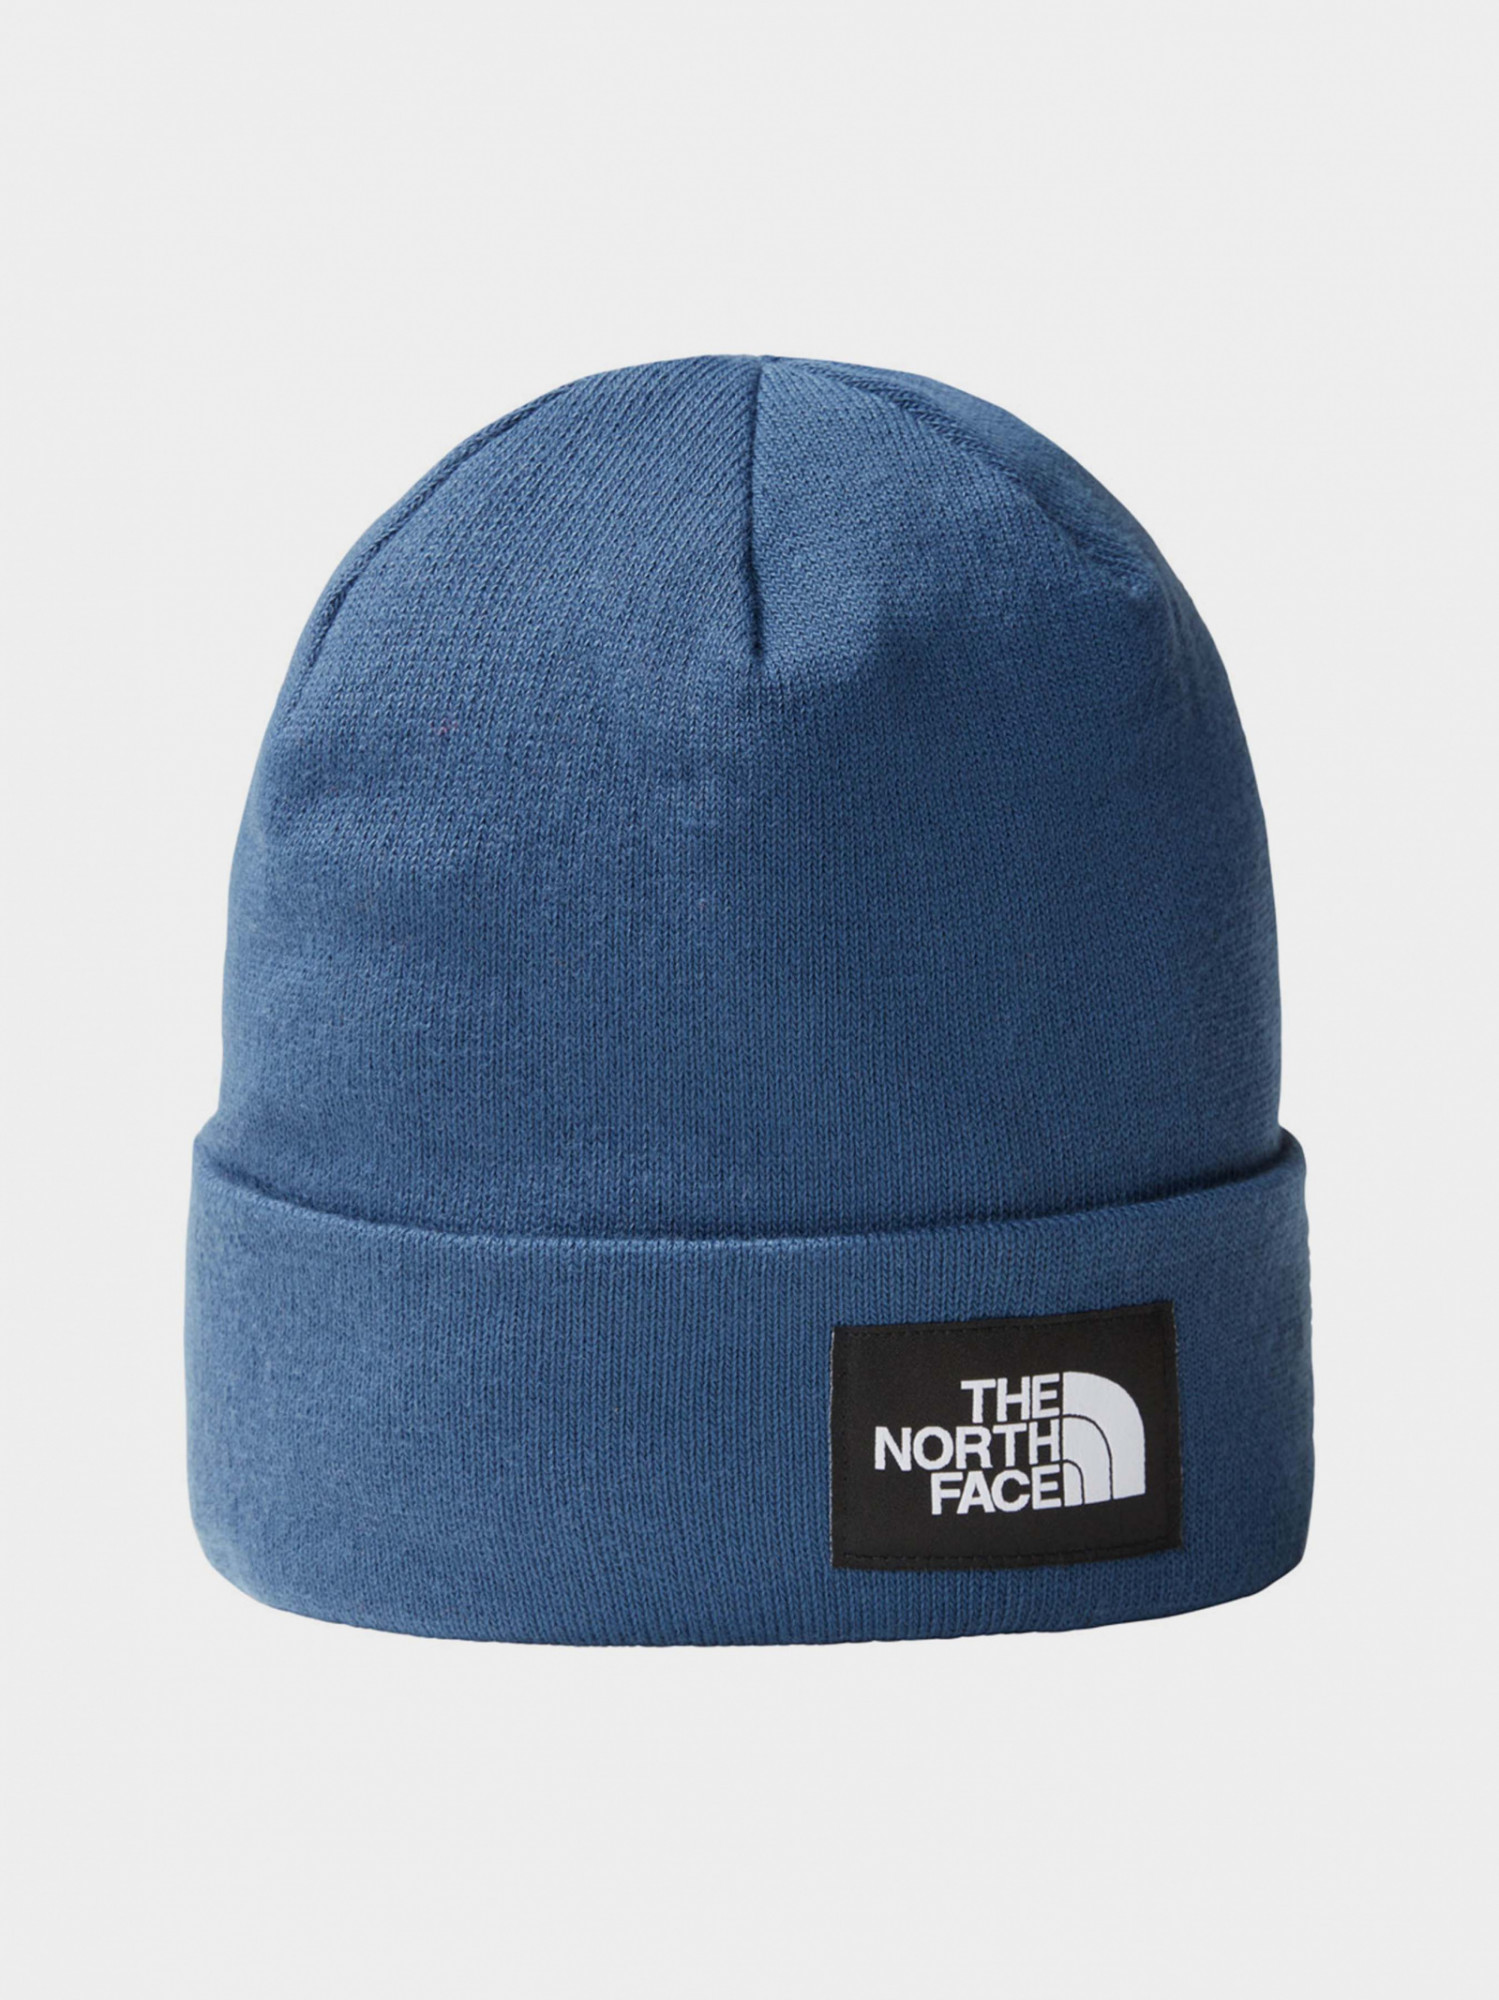 Шапка  The North Face DOCK WORKER RECYCLED BEANIE синя NF0A3FNTHDC1 изображение 2